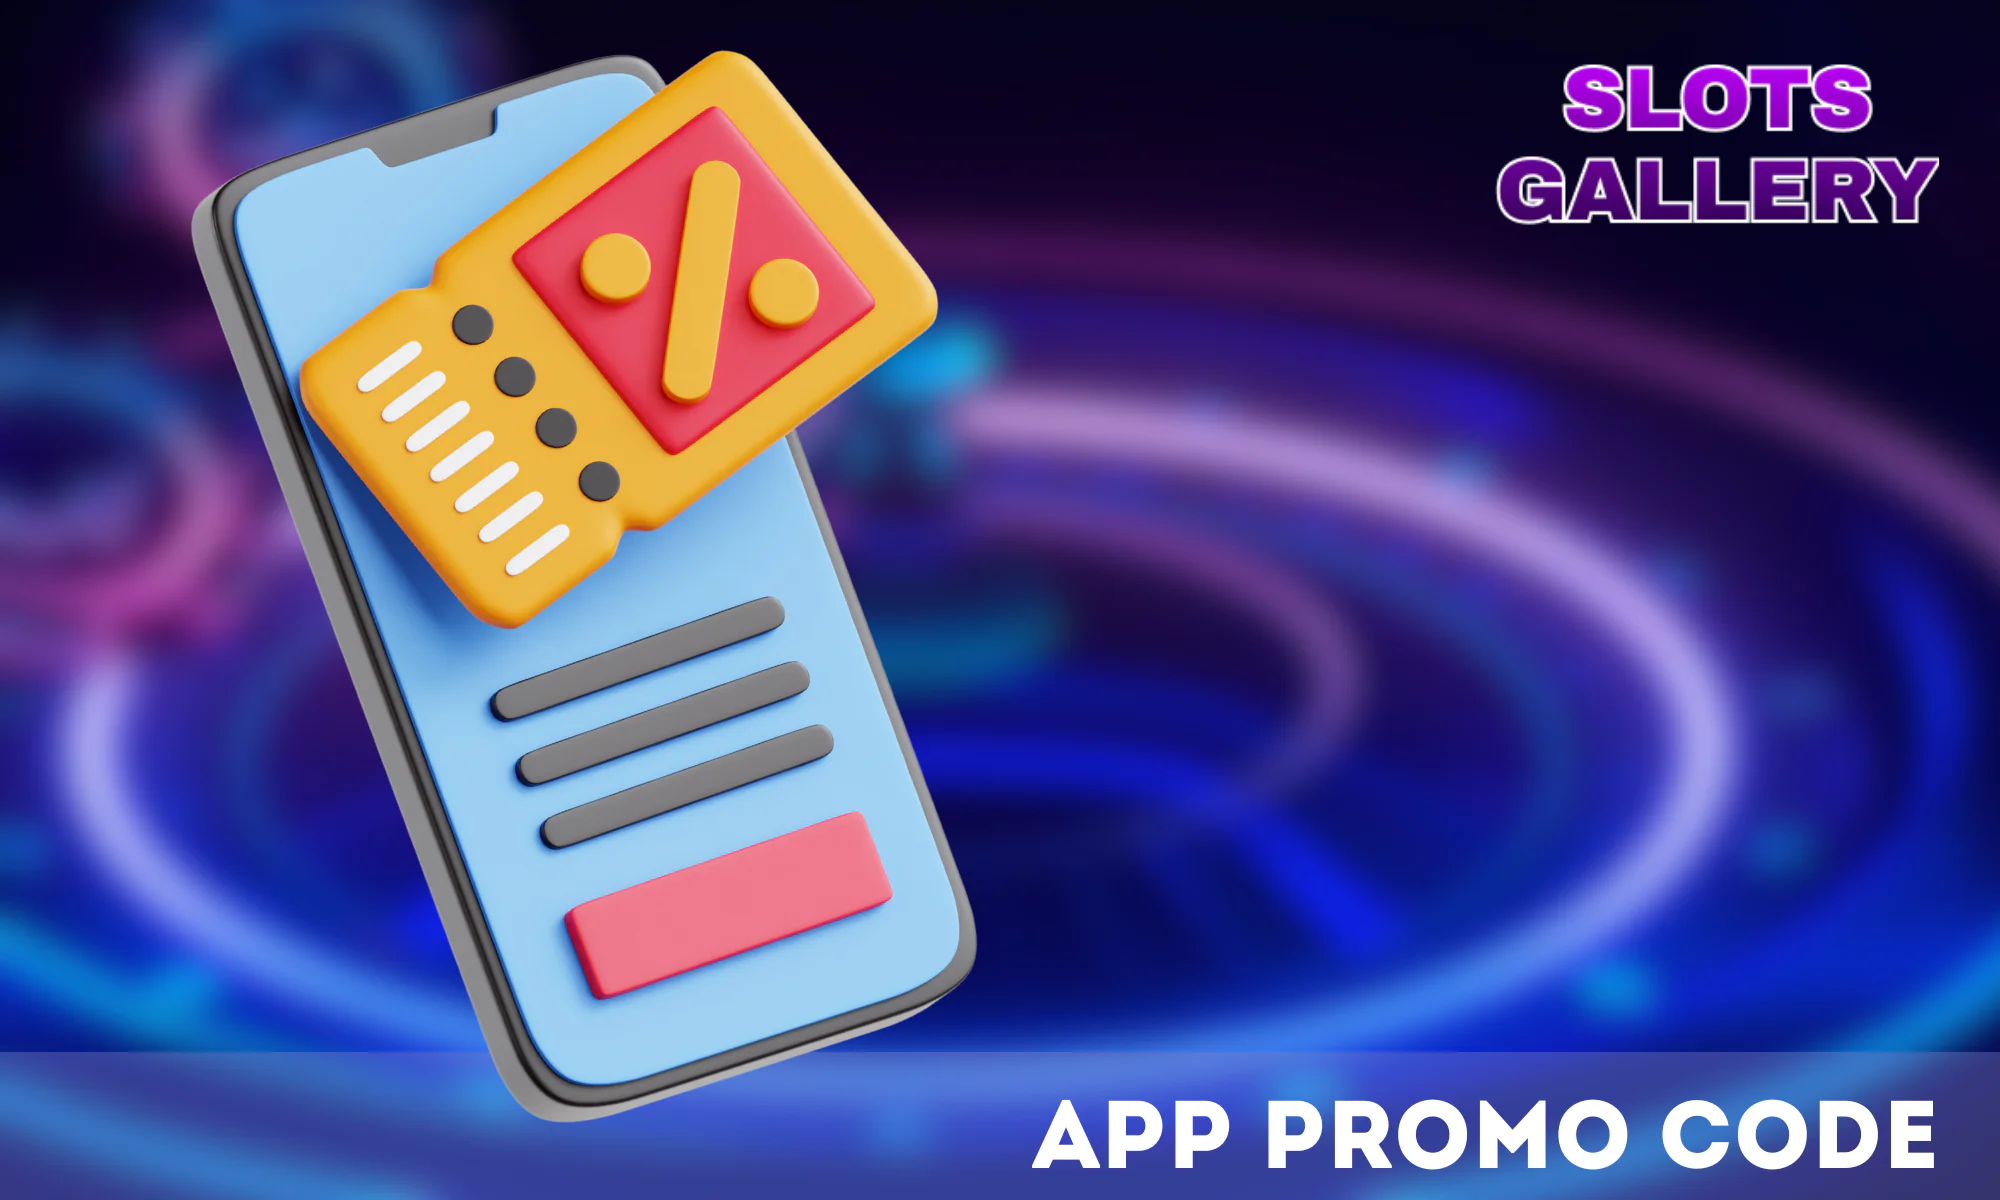 In the Slots Gallery mobile application, you can also use the opportunity to